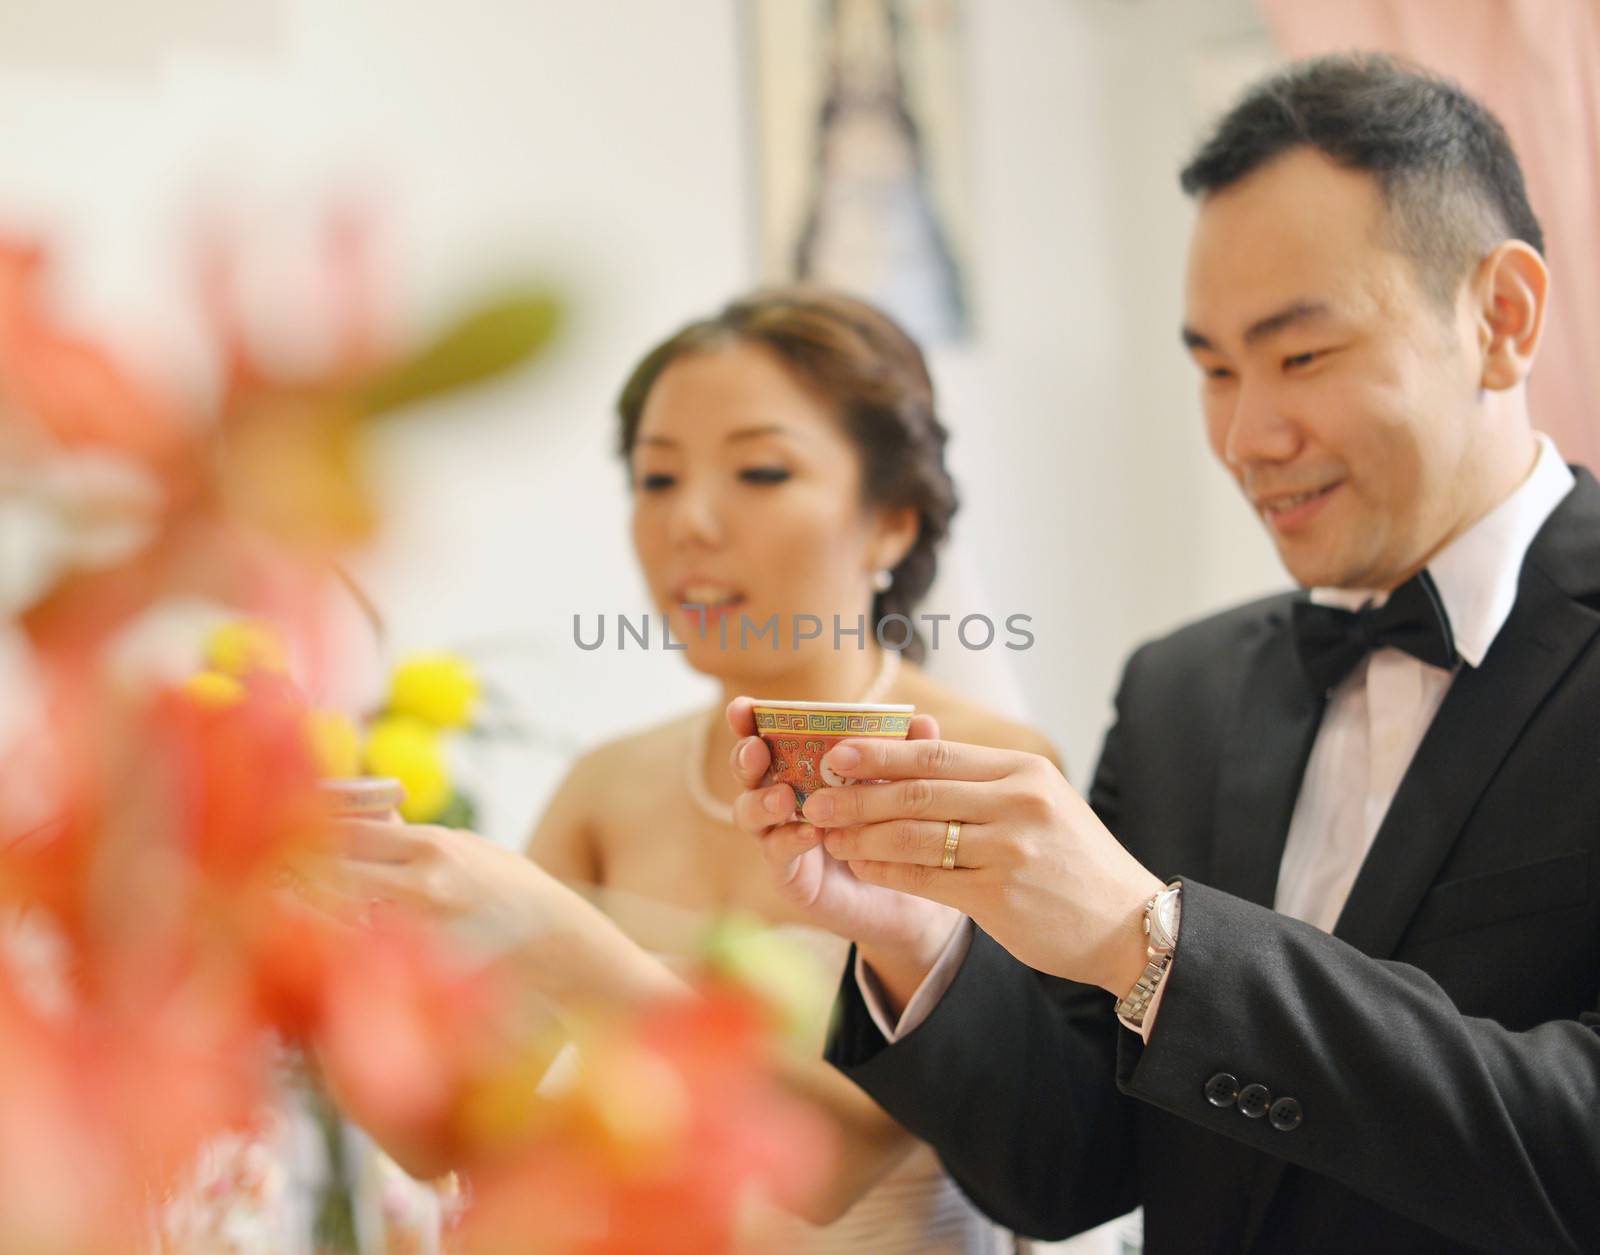 Traditional Chinese wedding tea ceremony, bride and groom, focus on hand and teacup.